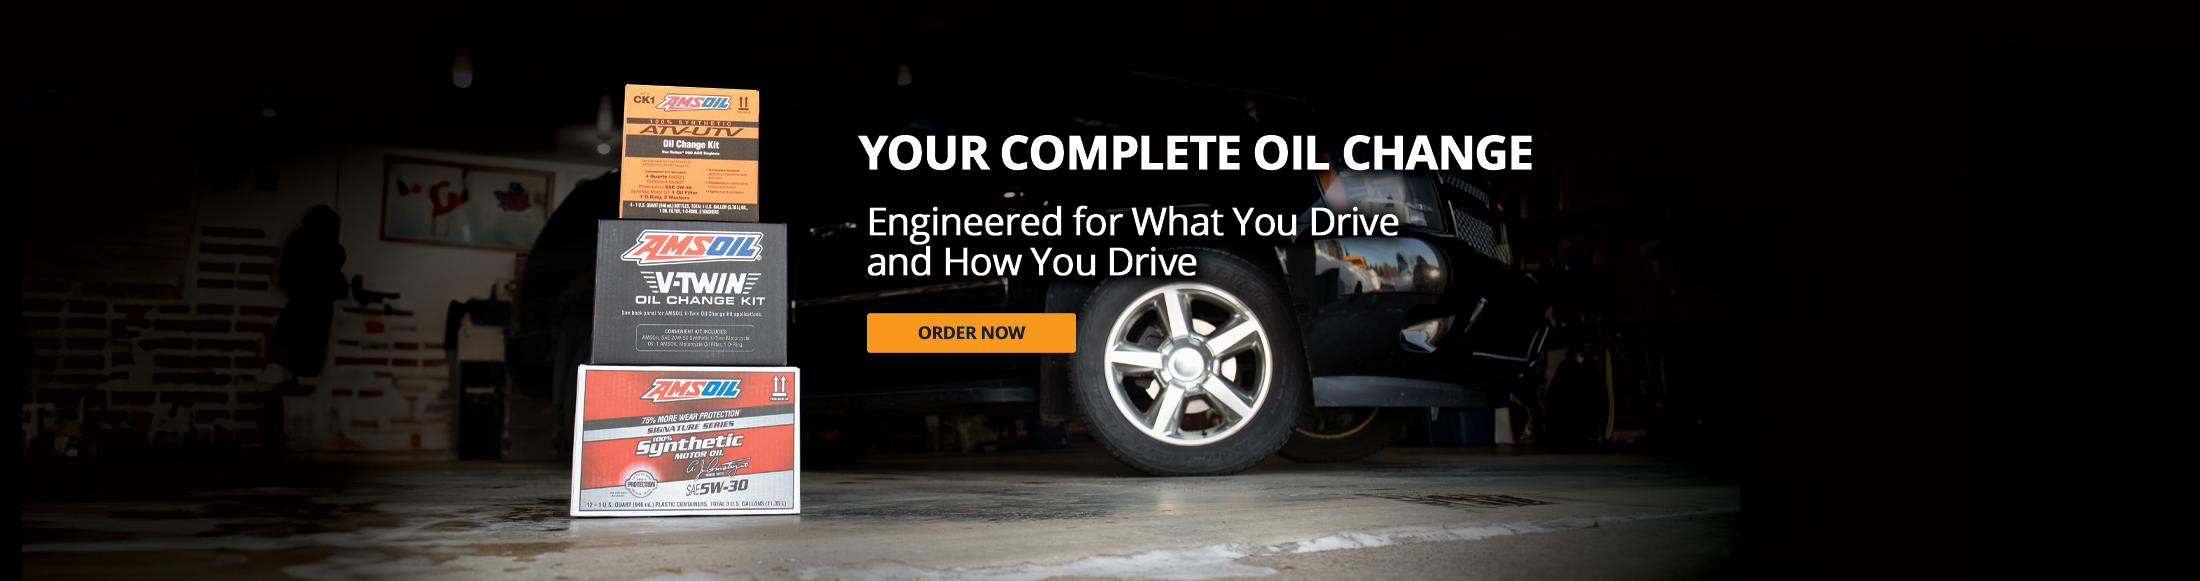 Your Complete Oil Change. Engineered for what you drive and how you drive. Order Now.